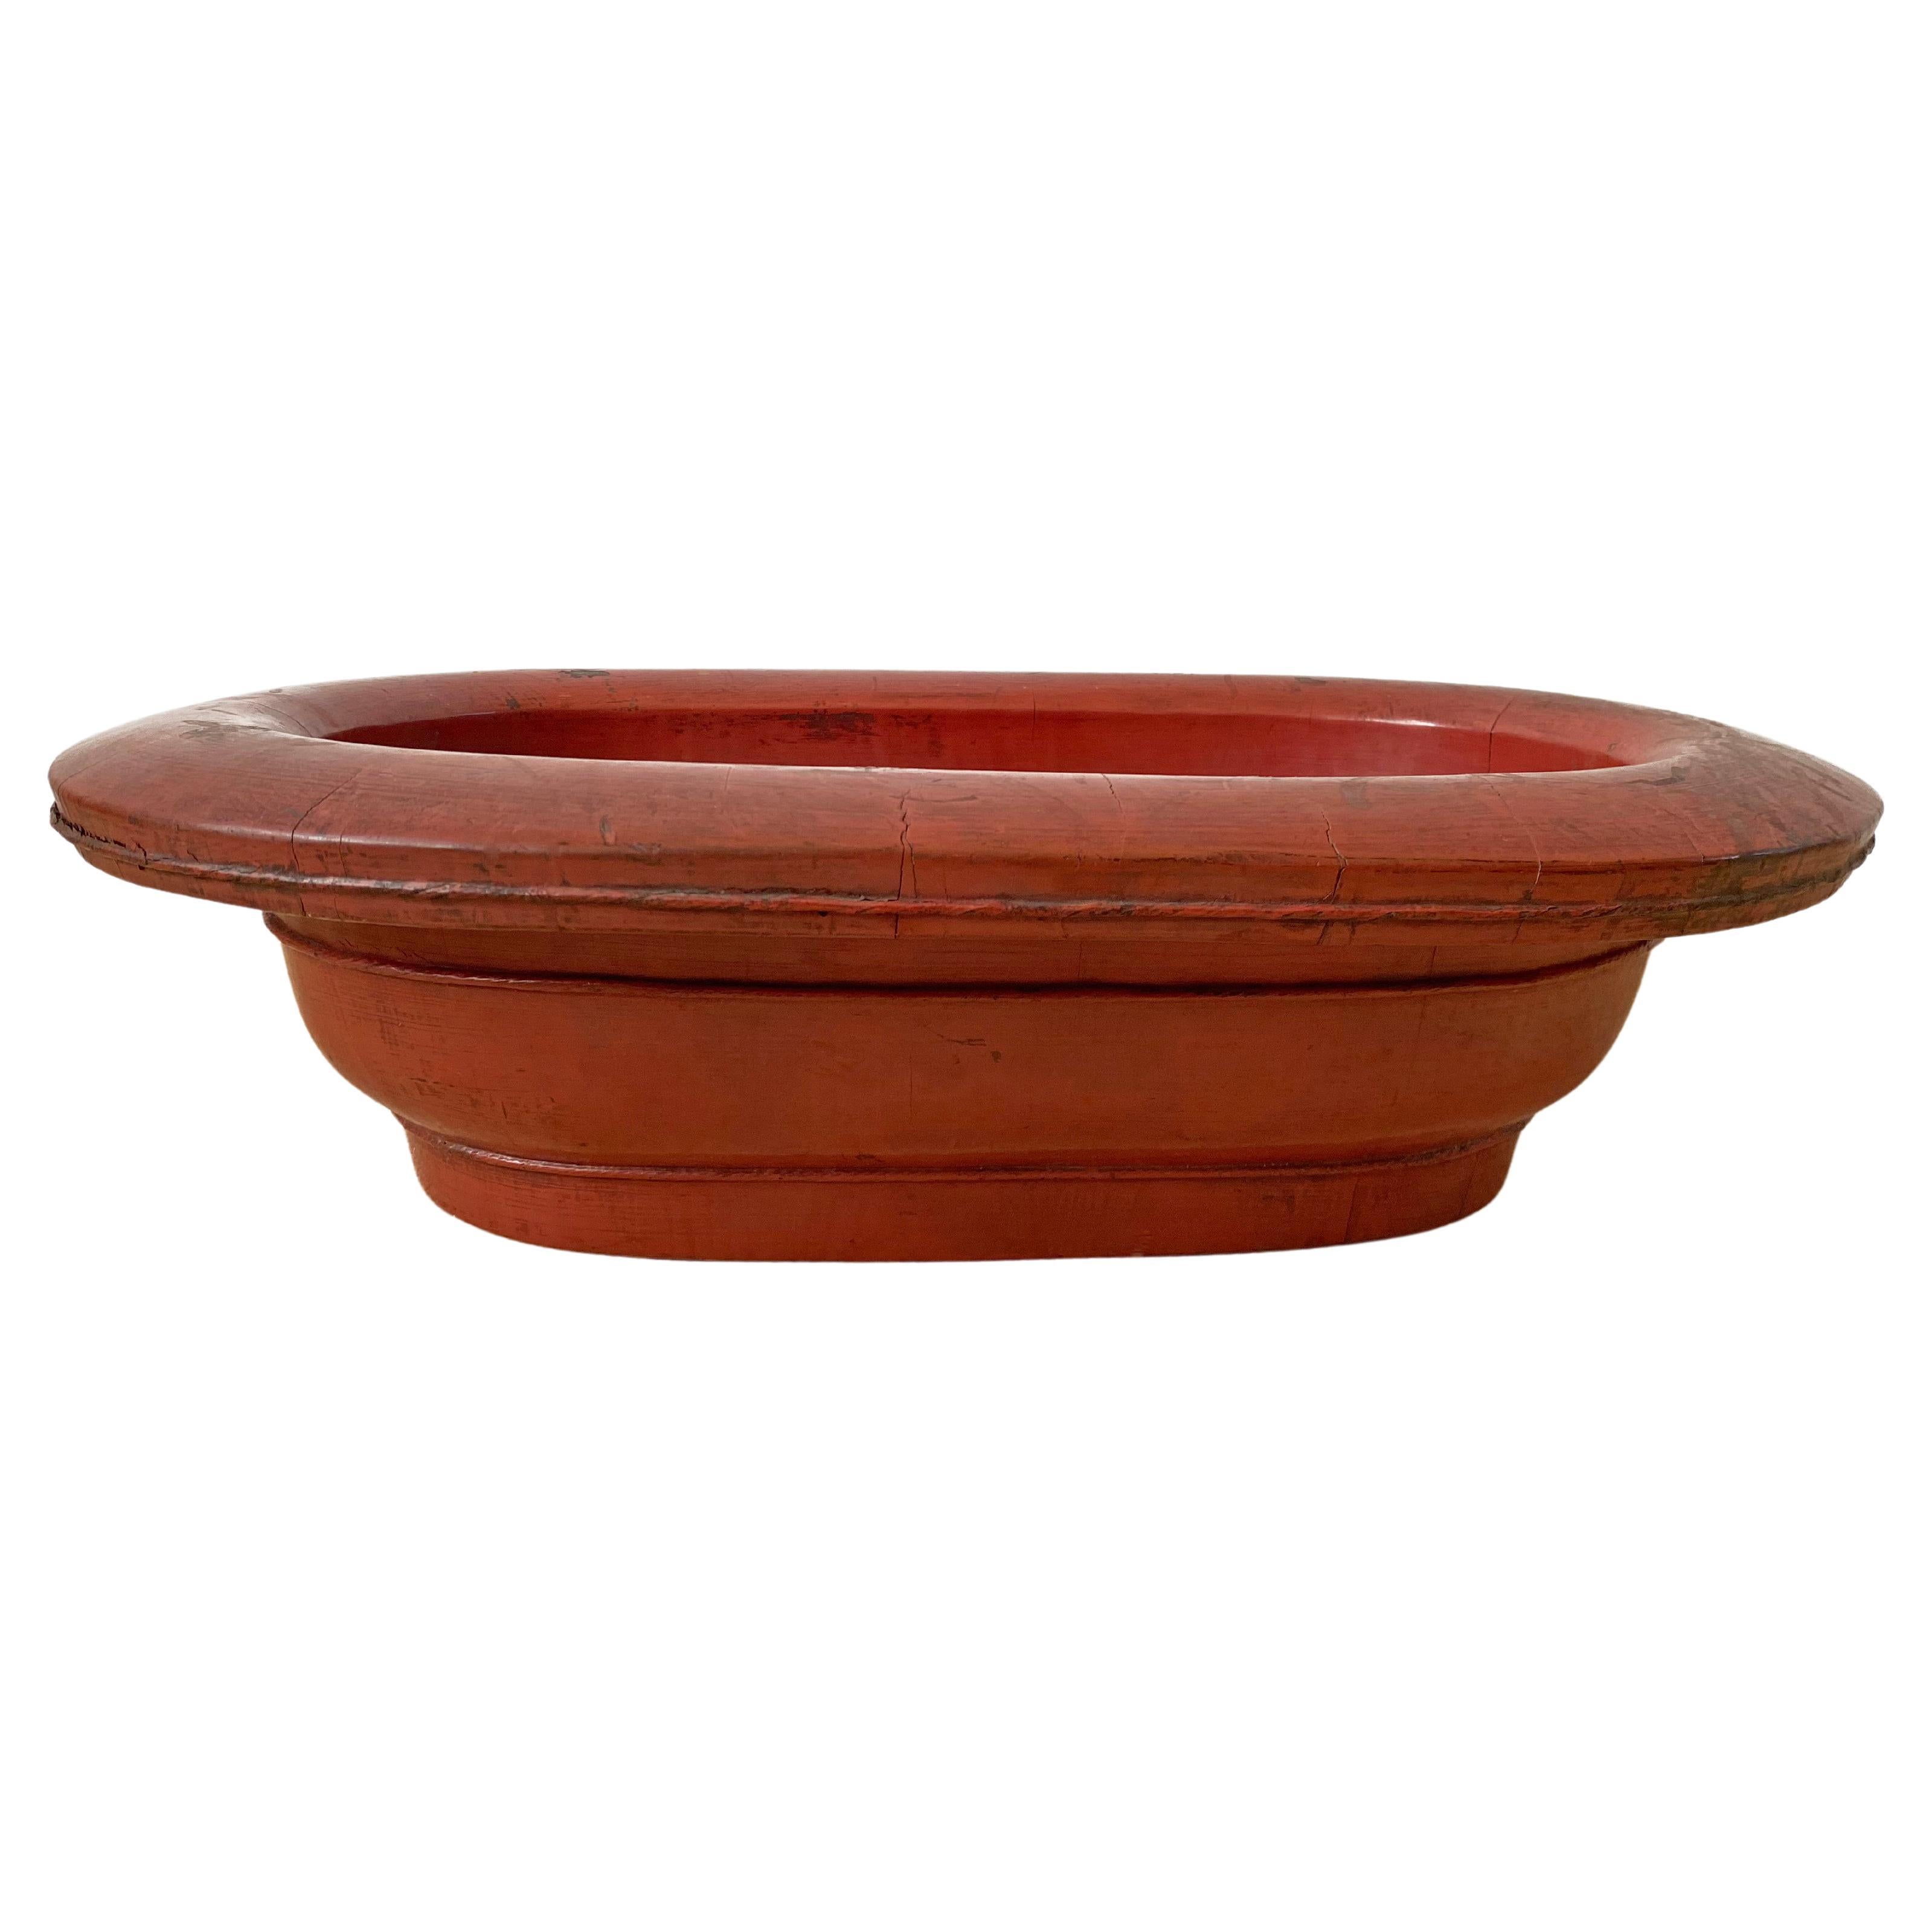 Large Chinese Red Lacquer Wood Bowl, Early 20th Century